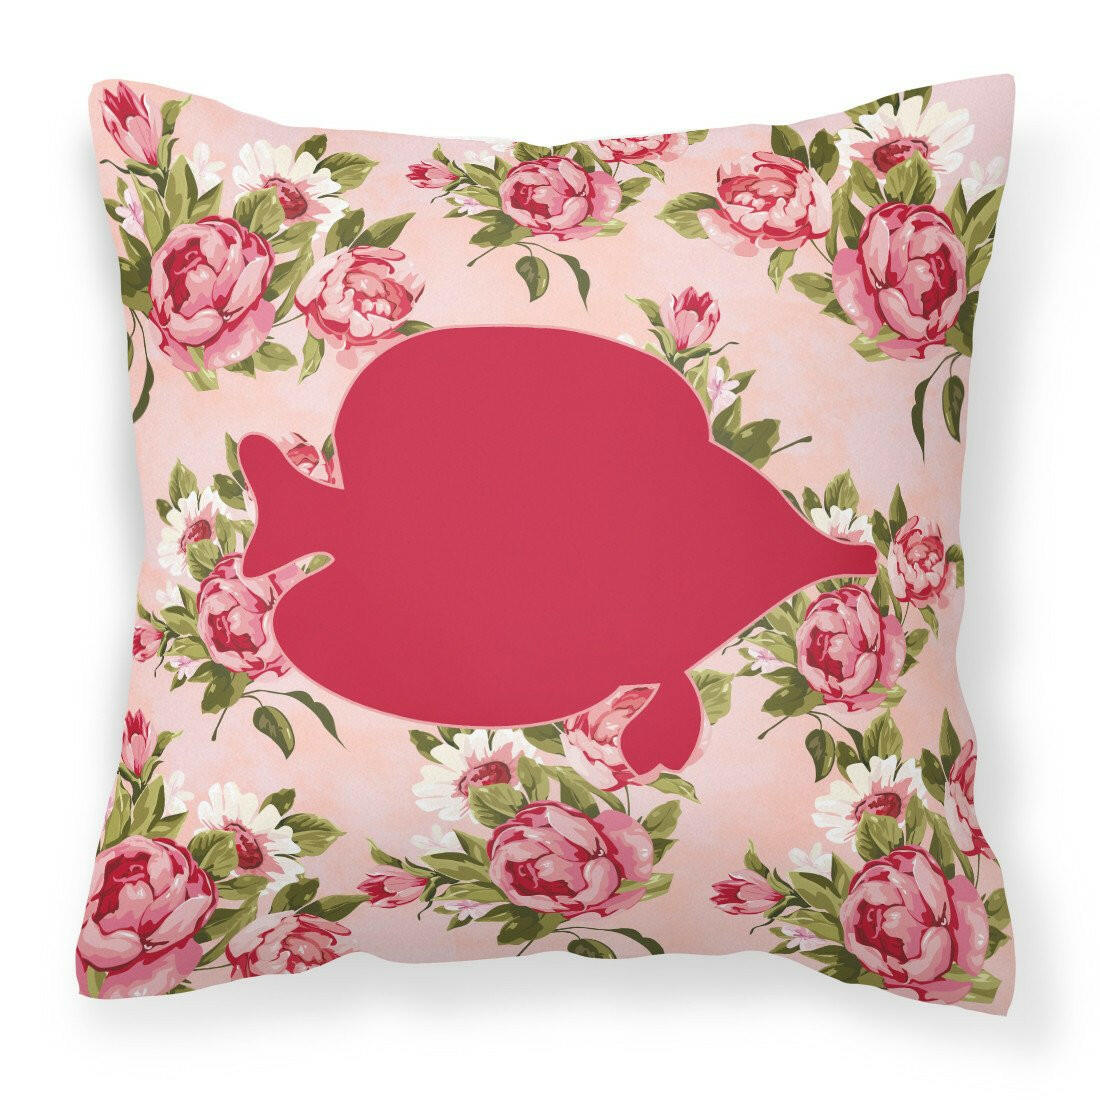 Fish - Tang Fish Shabby Chic Pink Roses  Fabric Decorative Pillow BB1023-RS-PK-PW1414 - the-store.com